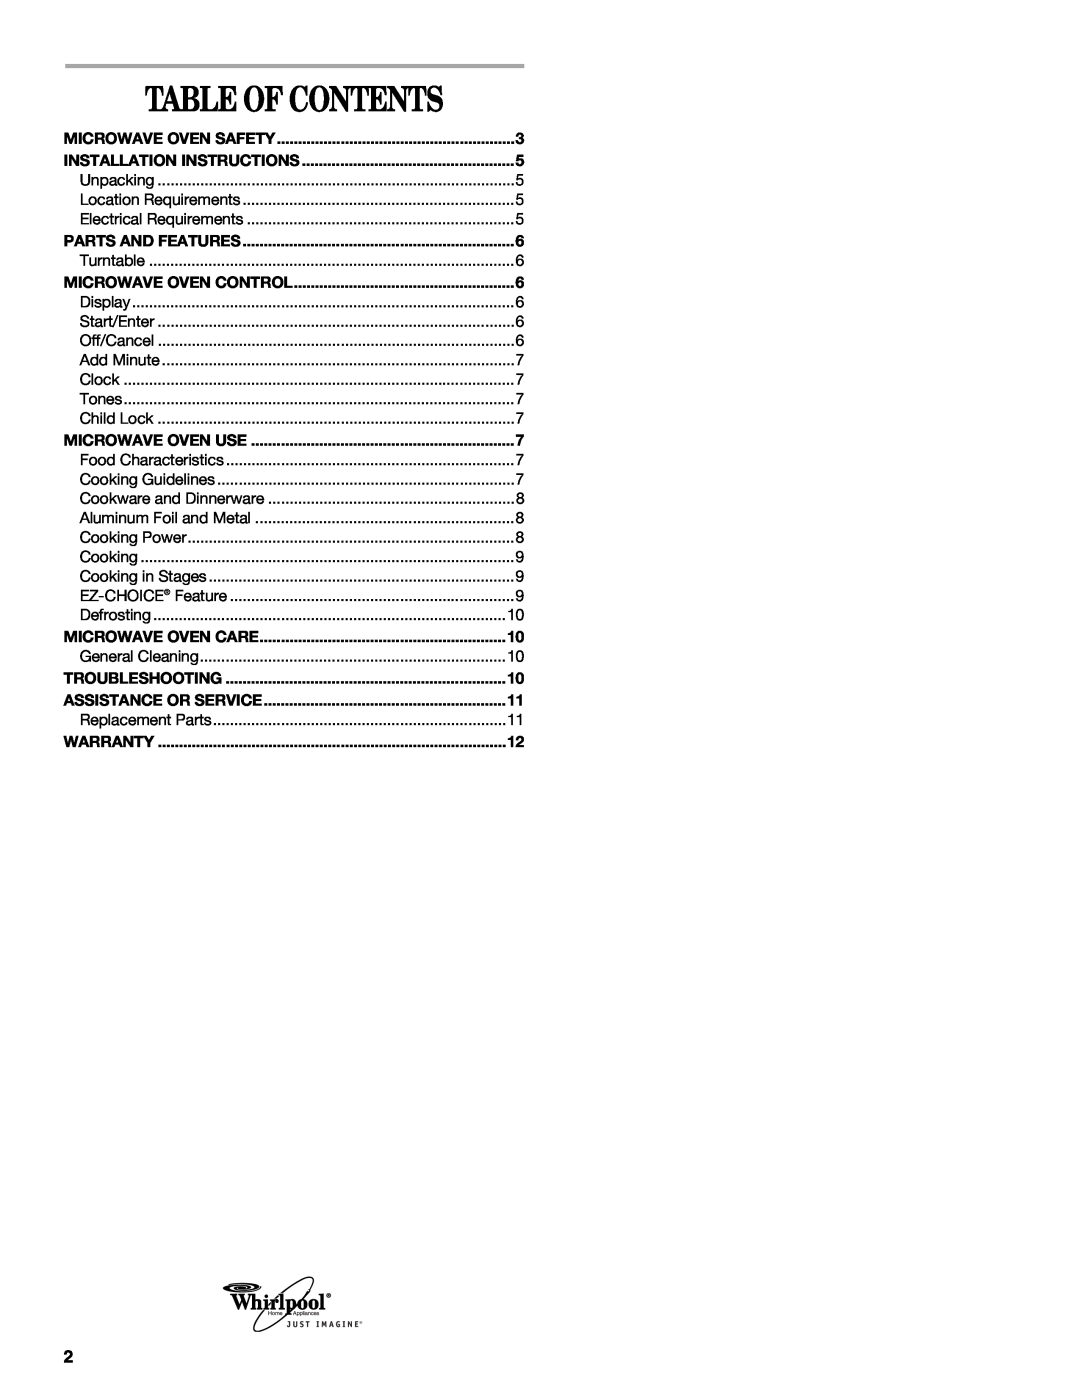 Whirlpool MT4078SP manual Table Of Contents 